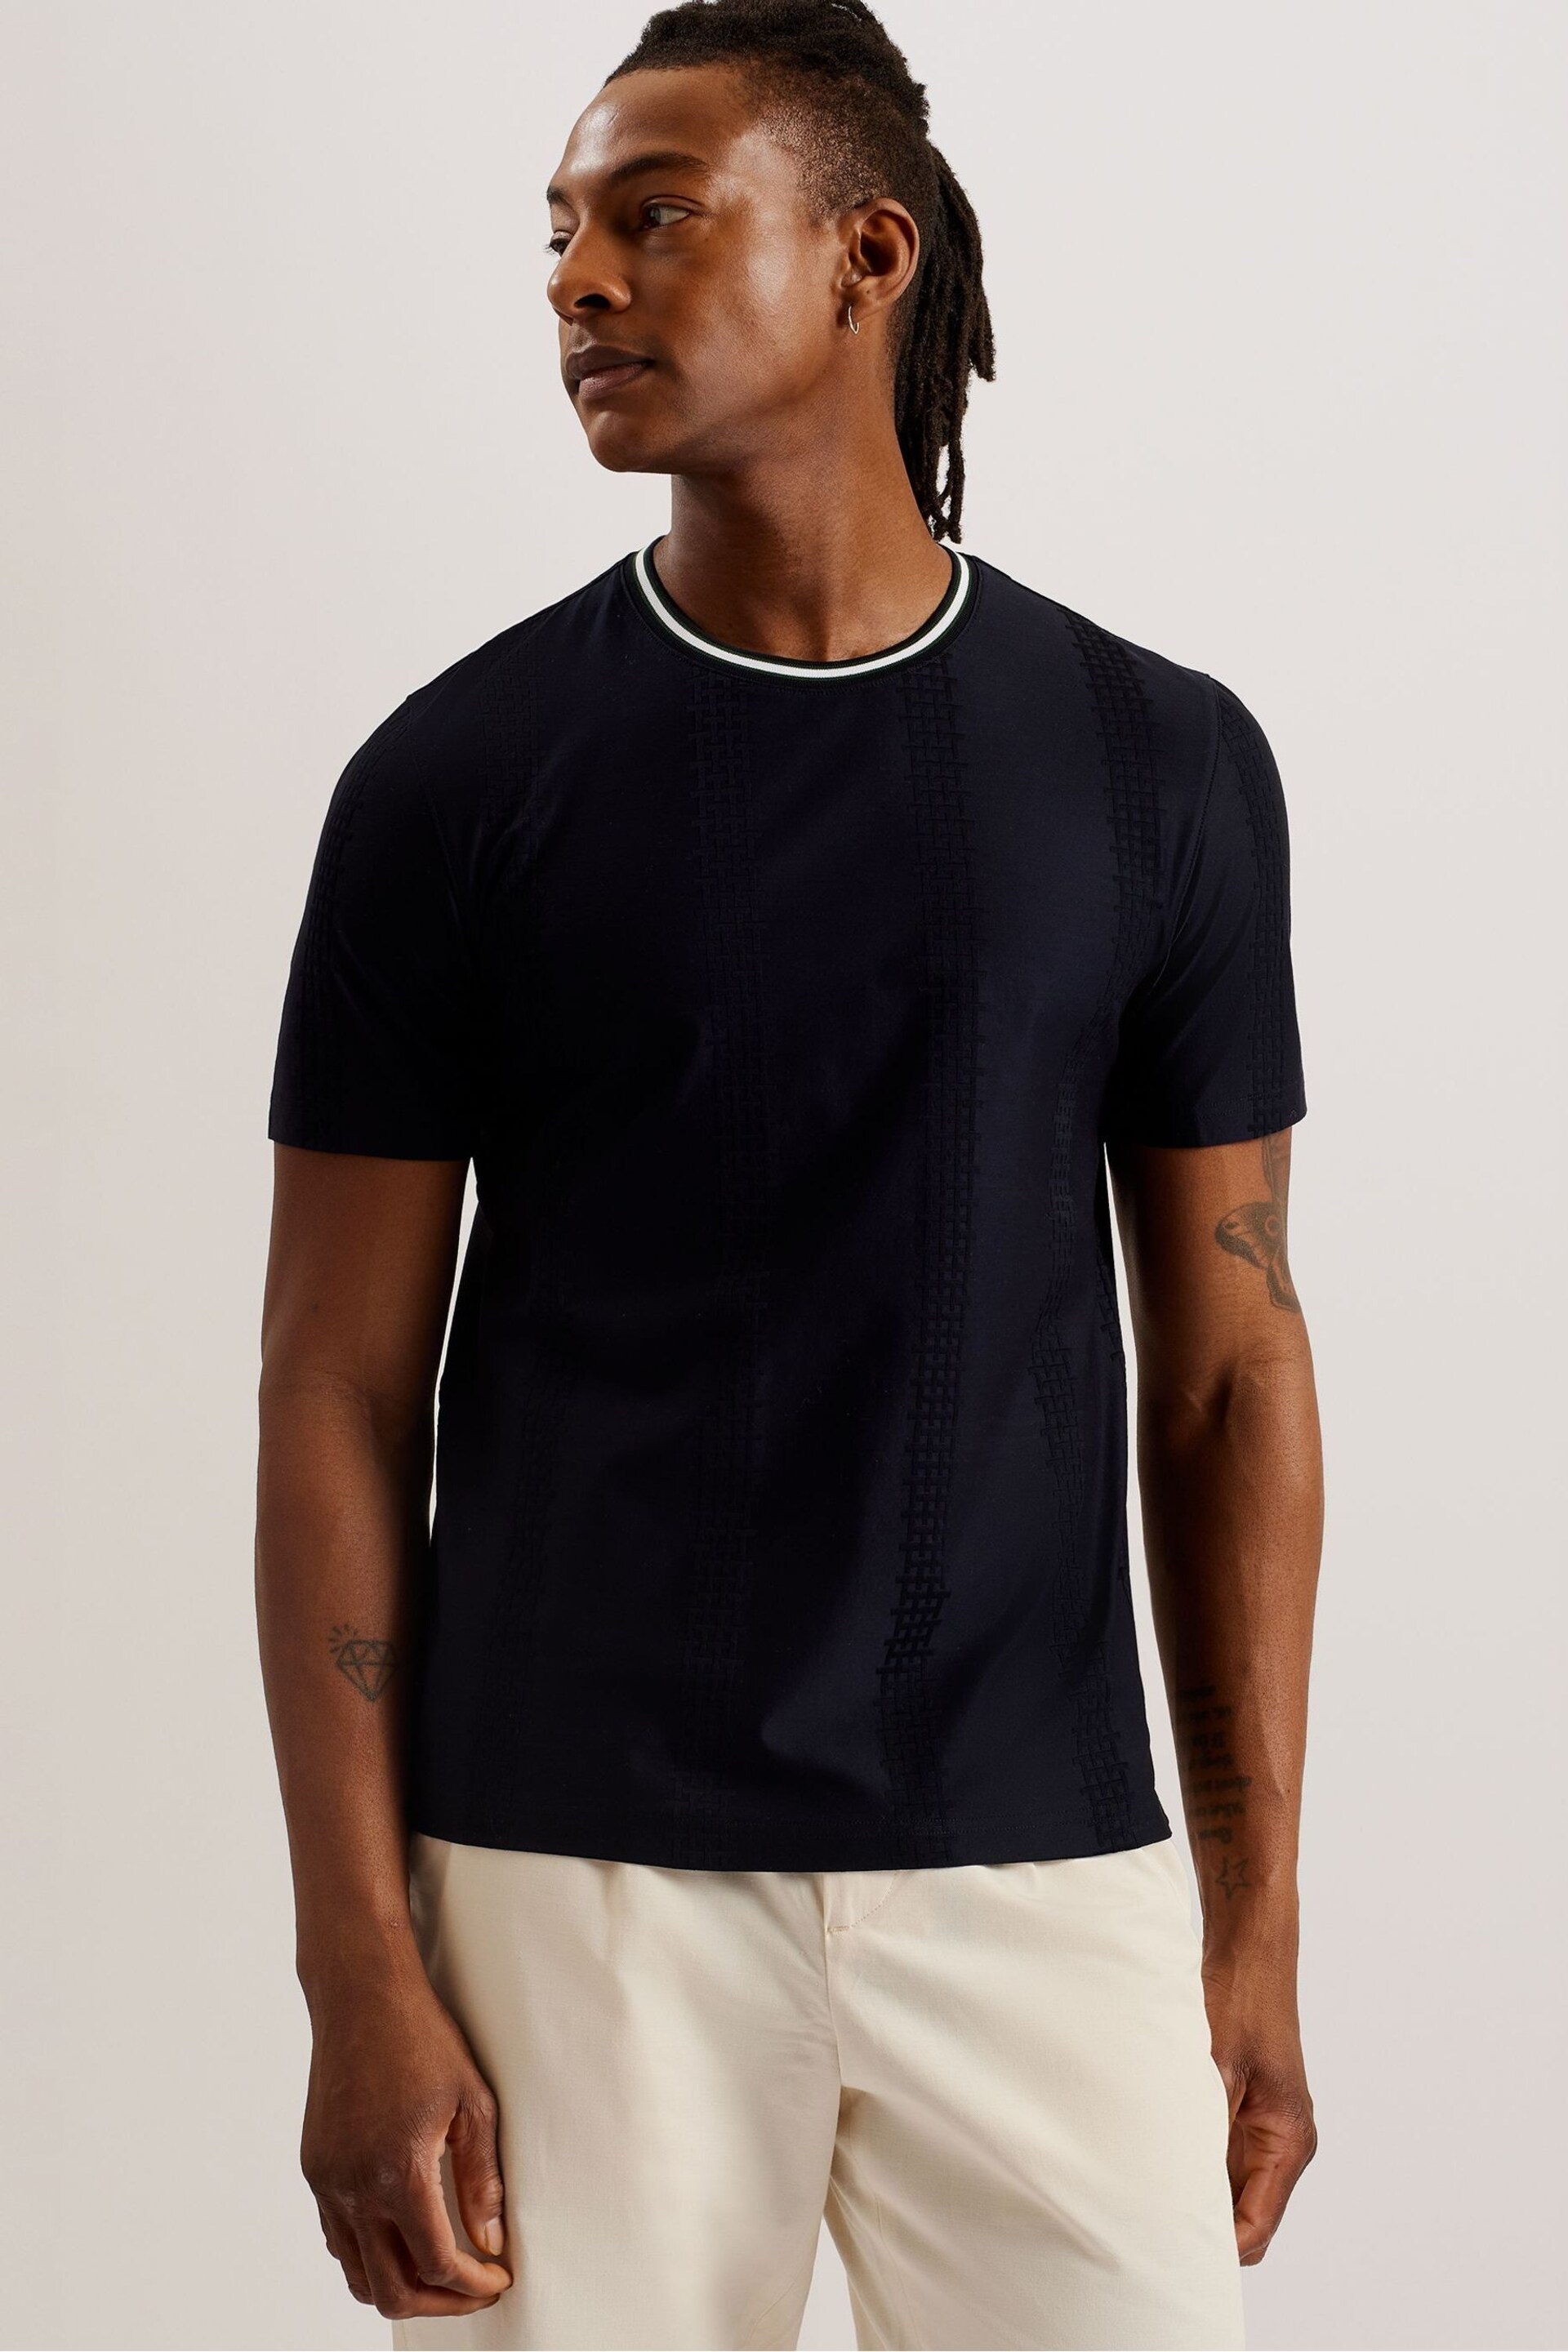 Ted Baker Slim Fit Rousel Jacquard T-Shirt - Image 3 of 6